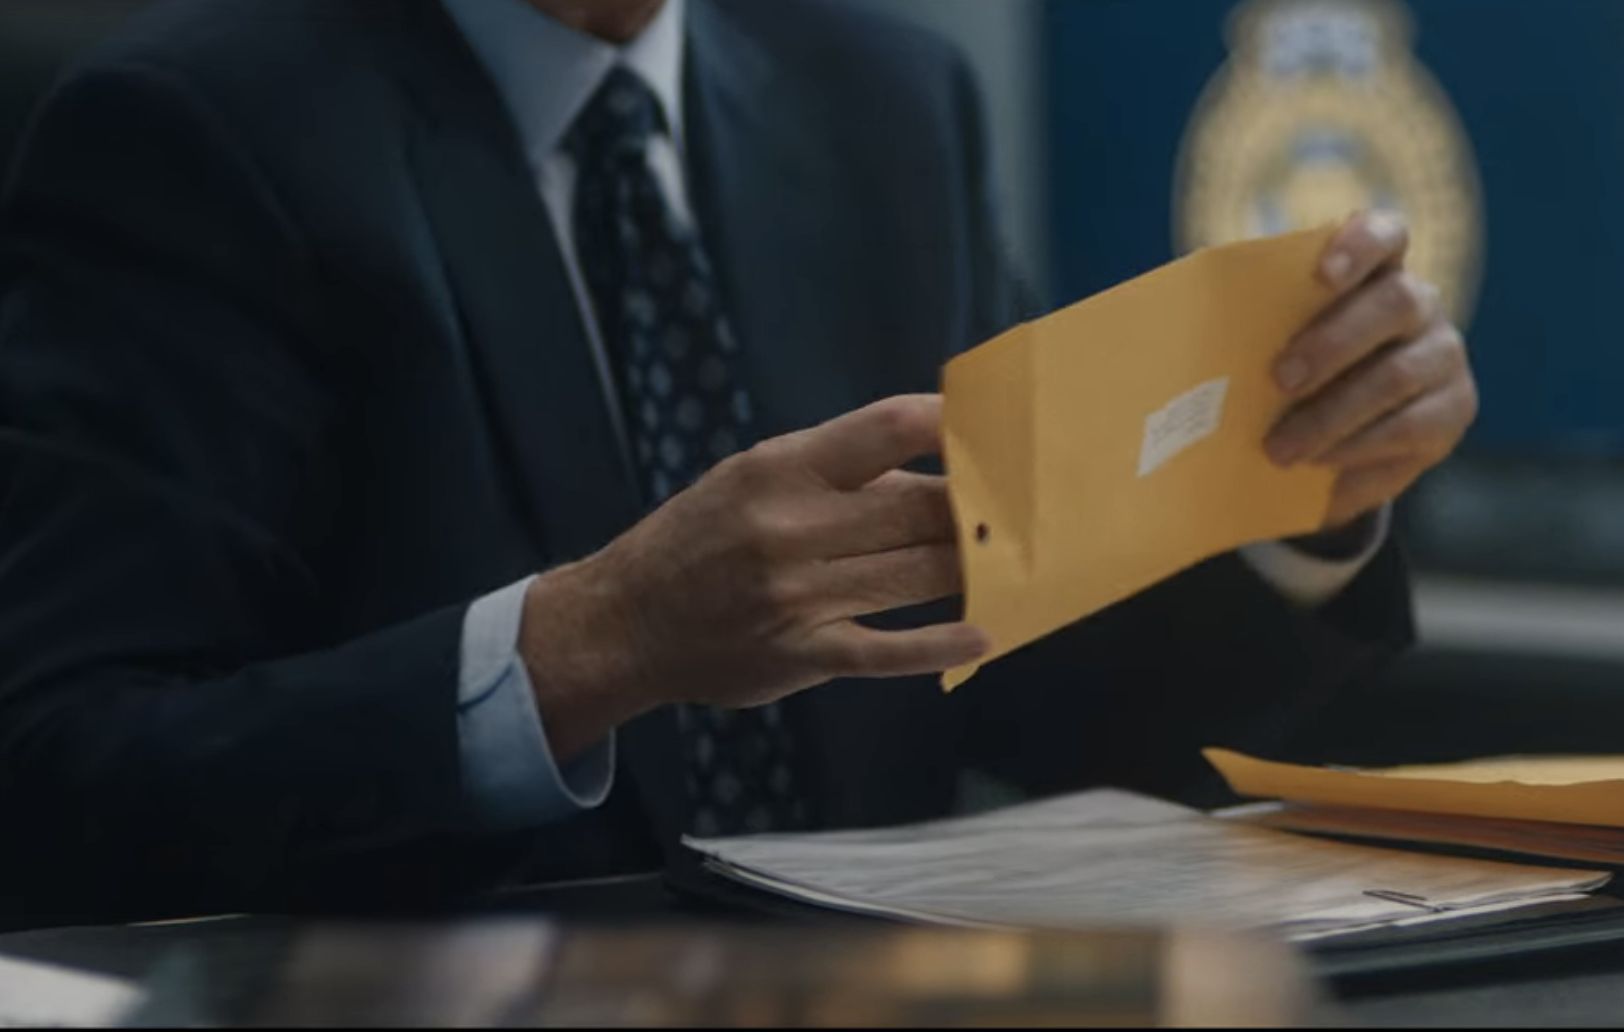 A person in a suit holding an envelope and with the DNA report on a table in front of them